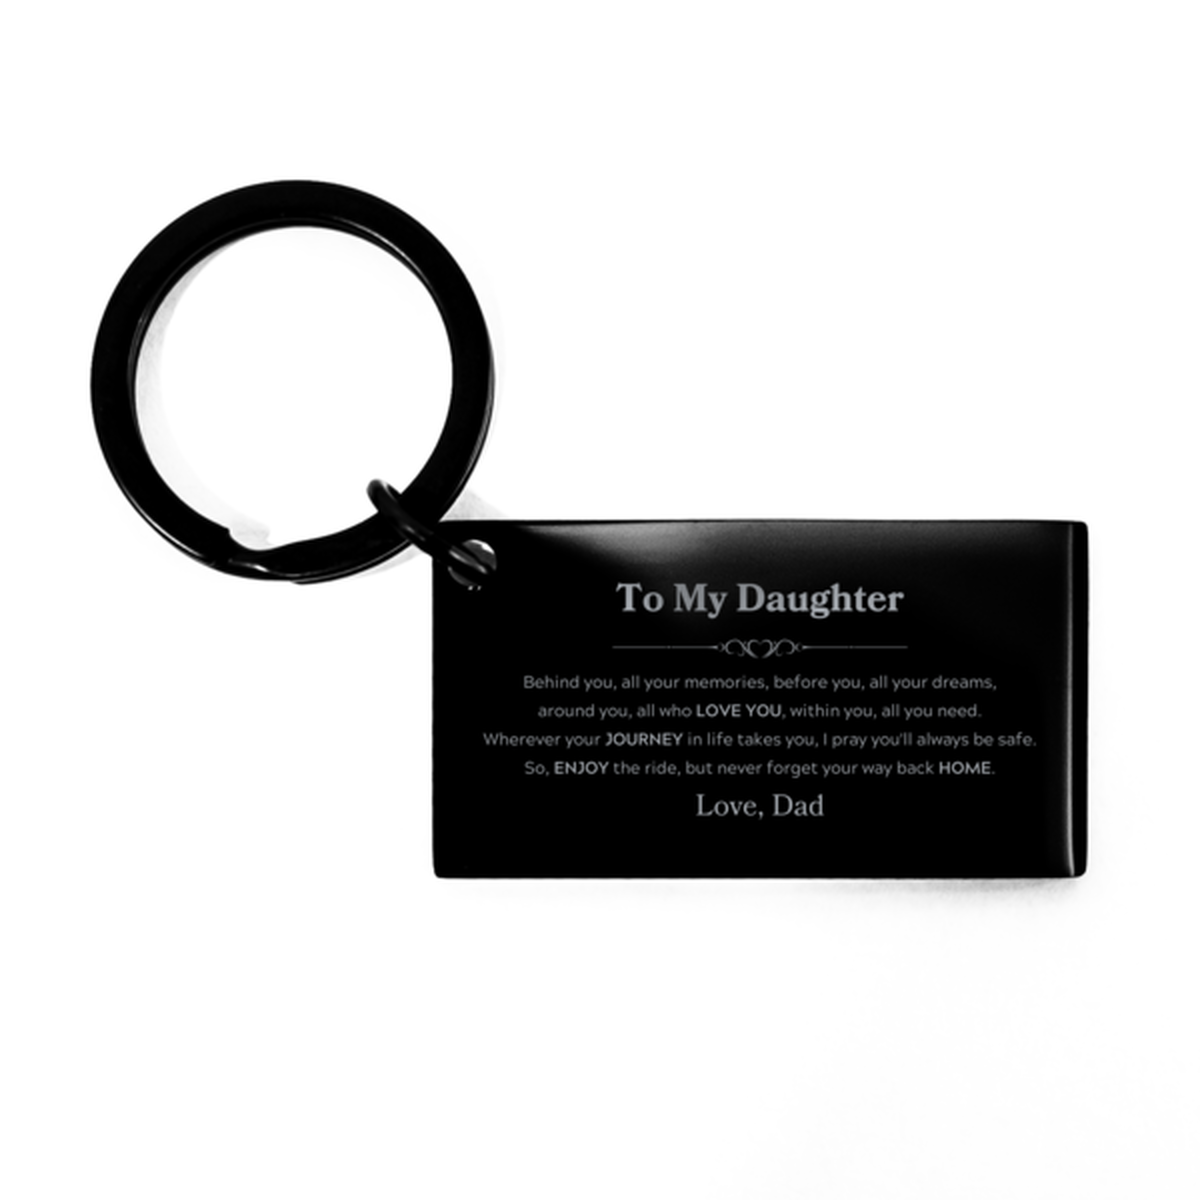 To My Daughter Graduation Gifts from Dad, Daughter Keychain Christmas Birthday Gifts for Daughter Behind you, all your memories, before you, all your dreams. Love, Dad